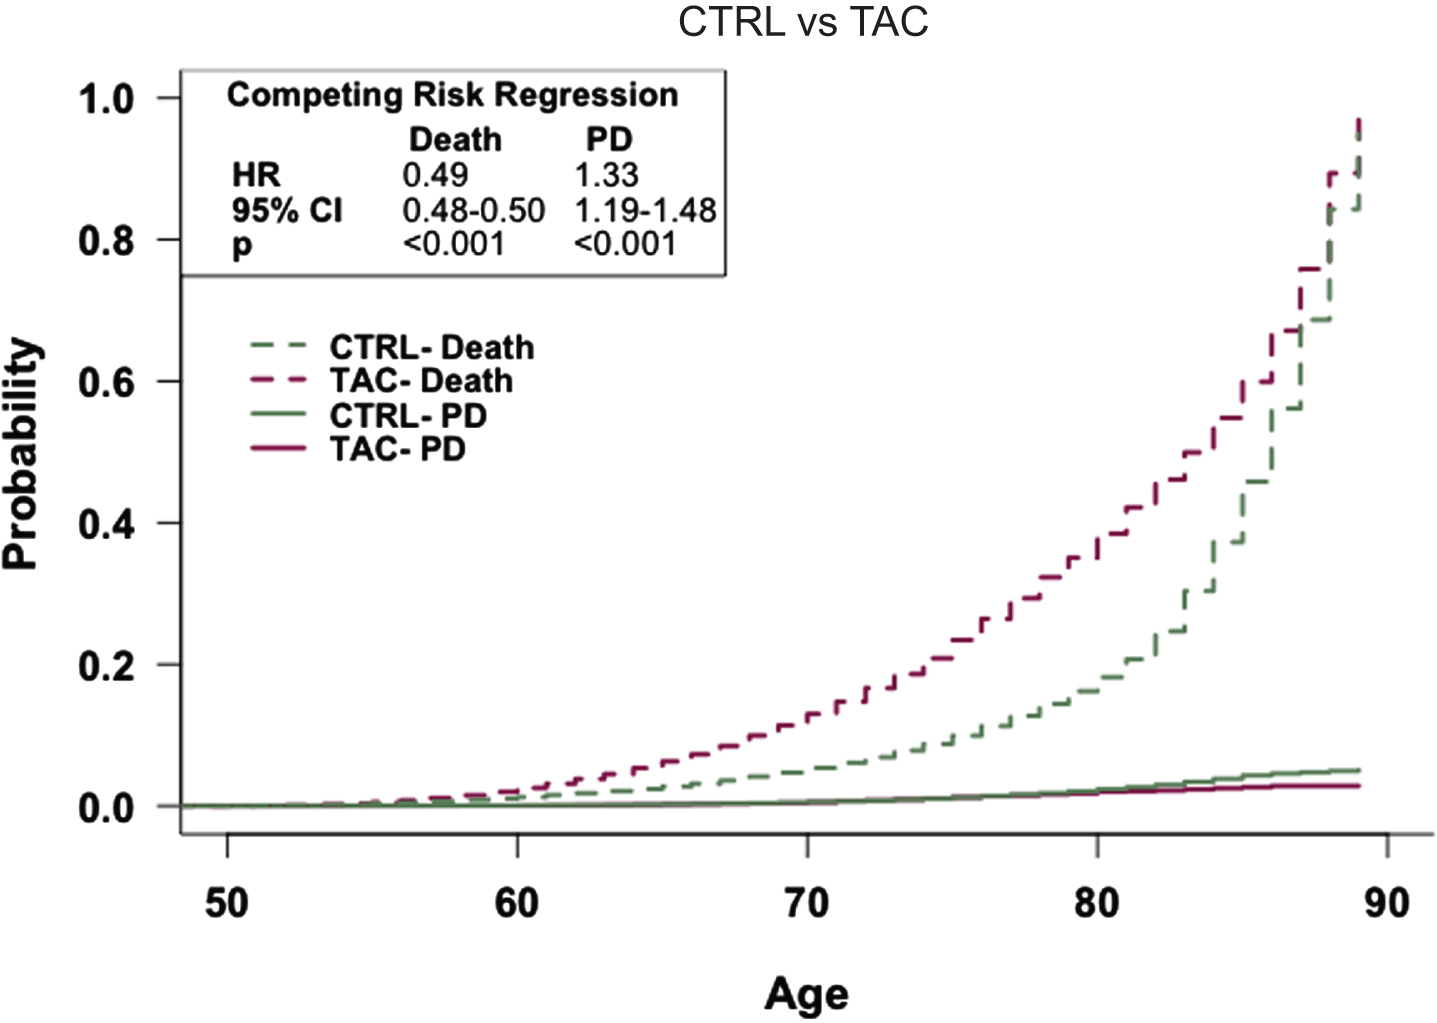 The general population has an increased risk of Parkinson’s disease compared to patients prescribed tacrolimus. Competing risk regression analysis of PD and death between patients prescribed tacrolimus or in the general population-like control. Patients in the general population-like control have an increased risk of PD but a decreased risk of death. n = 73,916 patients/cohort *CRR, competing risk regression; HR, hazard ratio; CI, confidence interval.